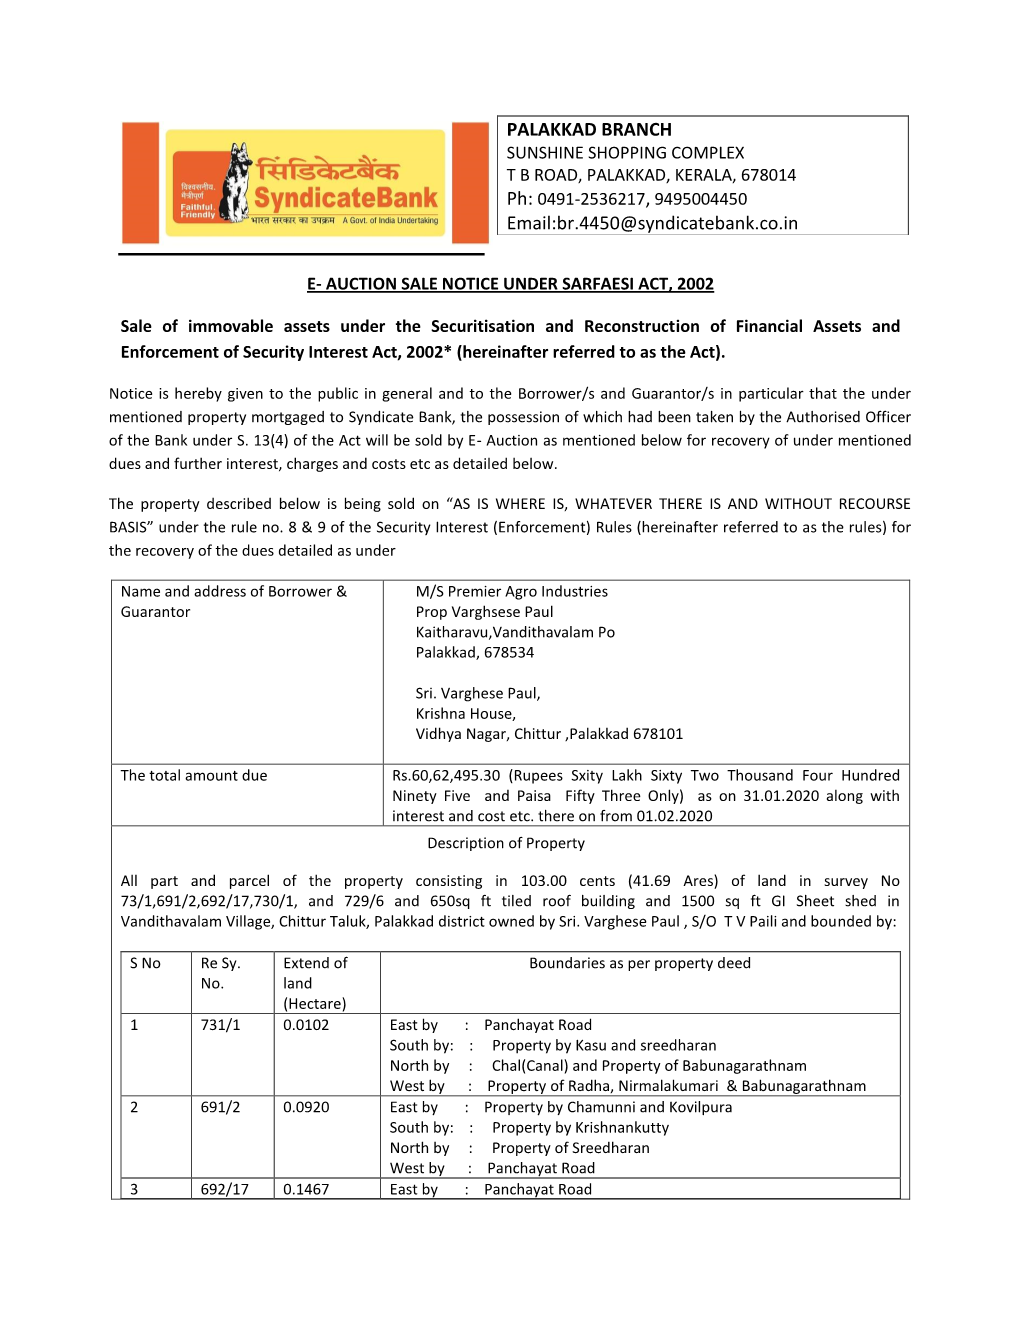 PALAKKAD BRANCH Email:Br.4450@Syndicatebank.Co.In